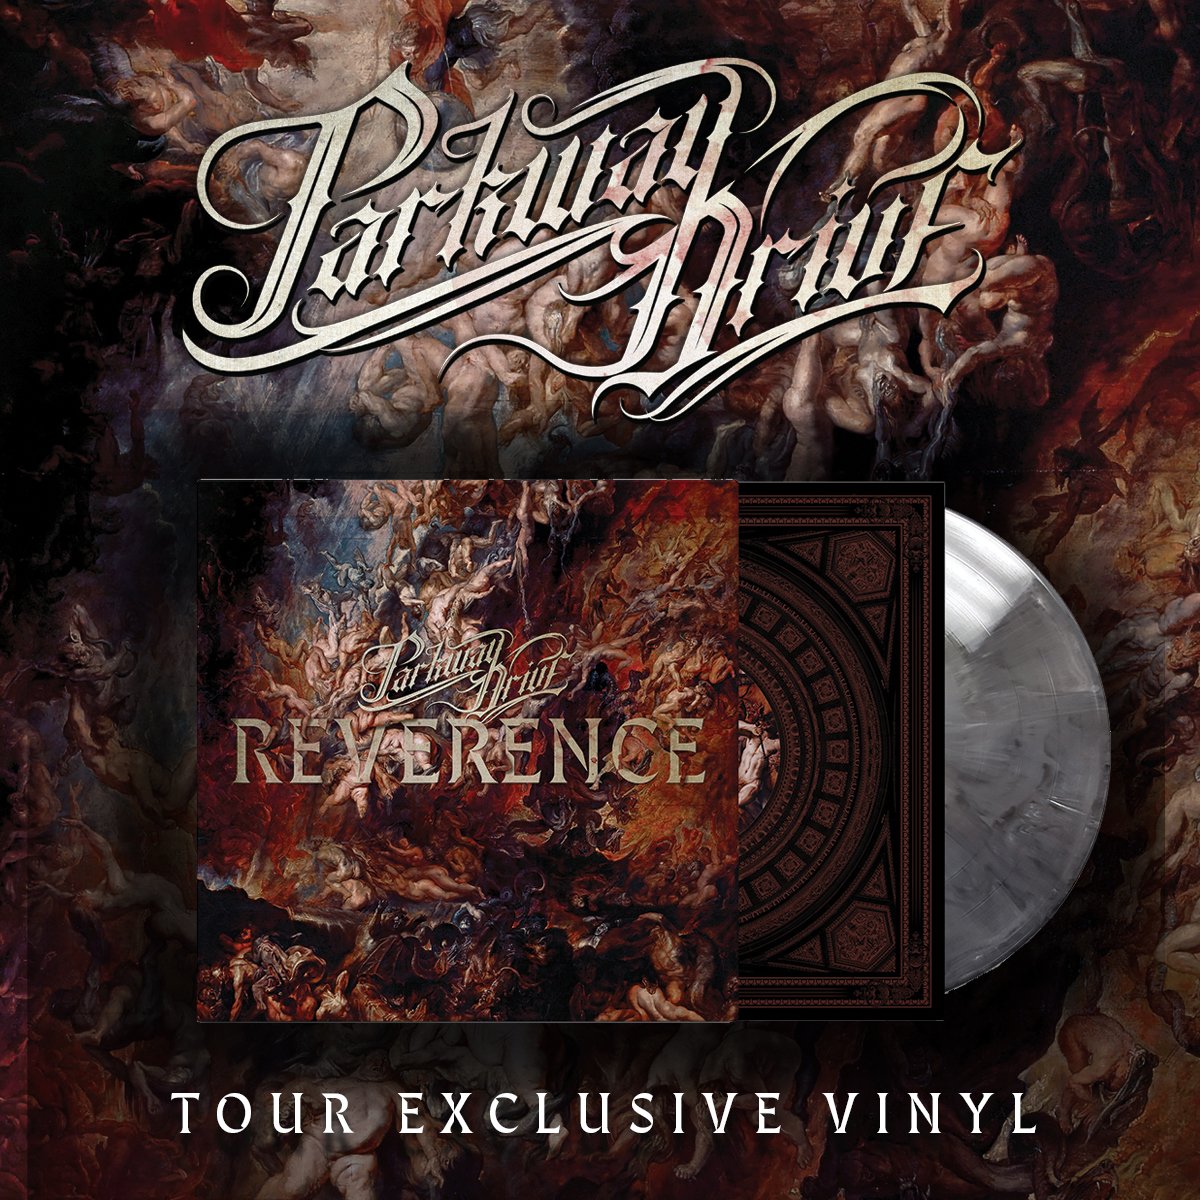 Parkway on Twitter: "🆕 Reverence tour exclusive vinyl, this will be available our upcoming shows! https://t.co/2zBEMAsukq" / Twitter